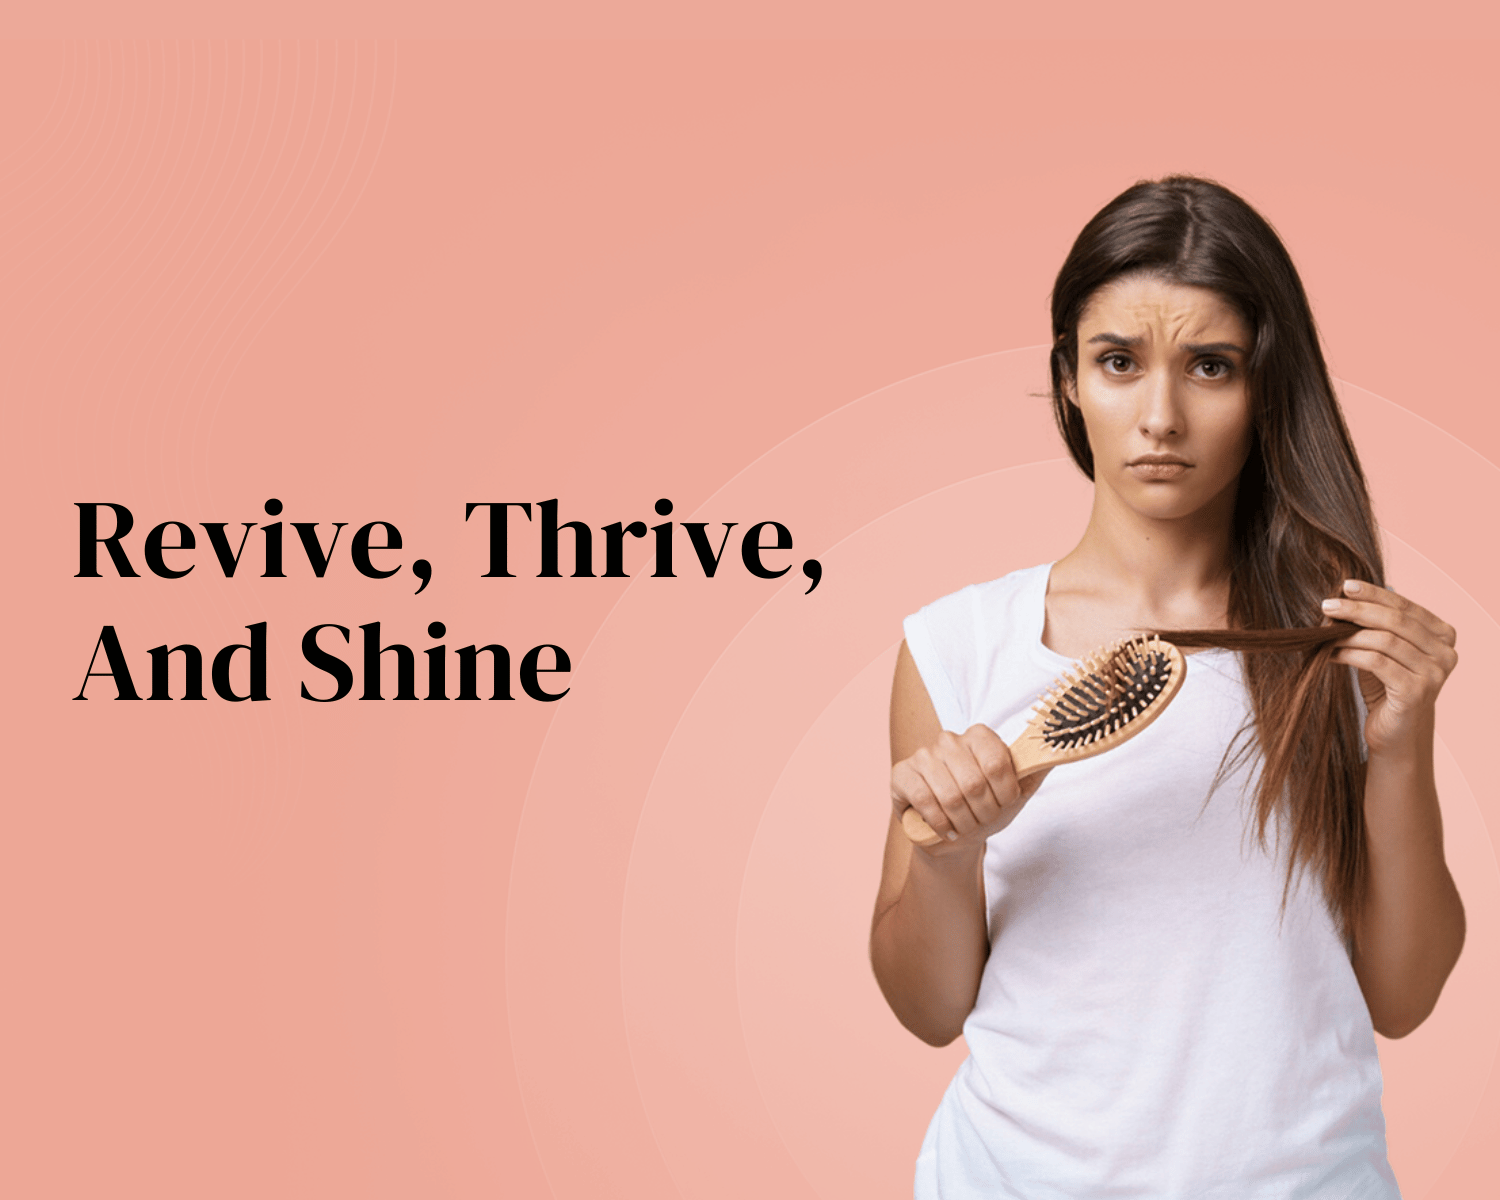 Revive, Thrive, And Shine